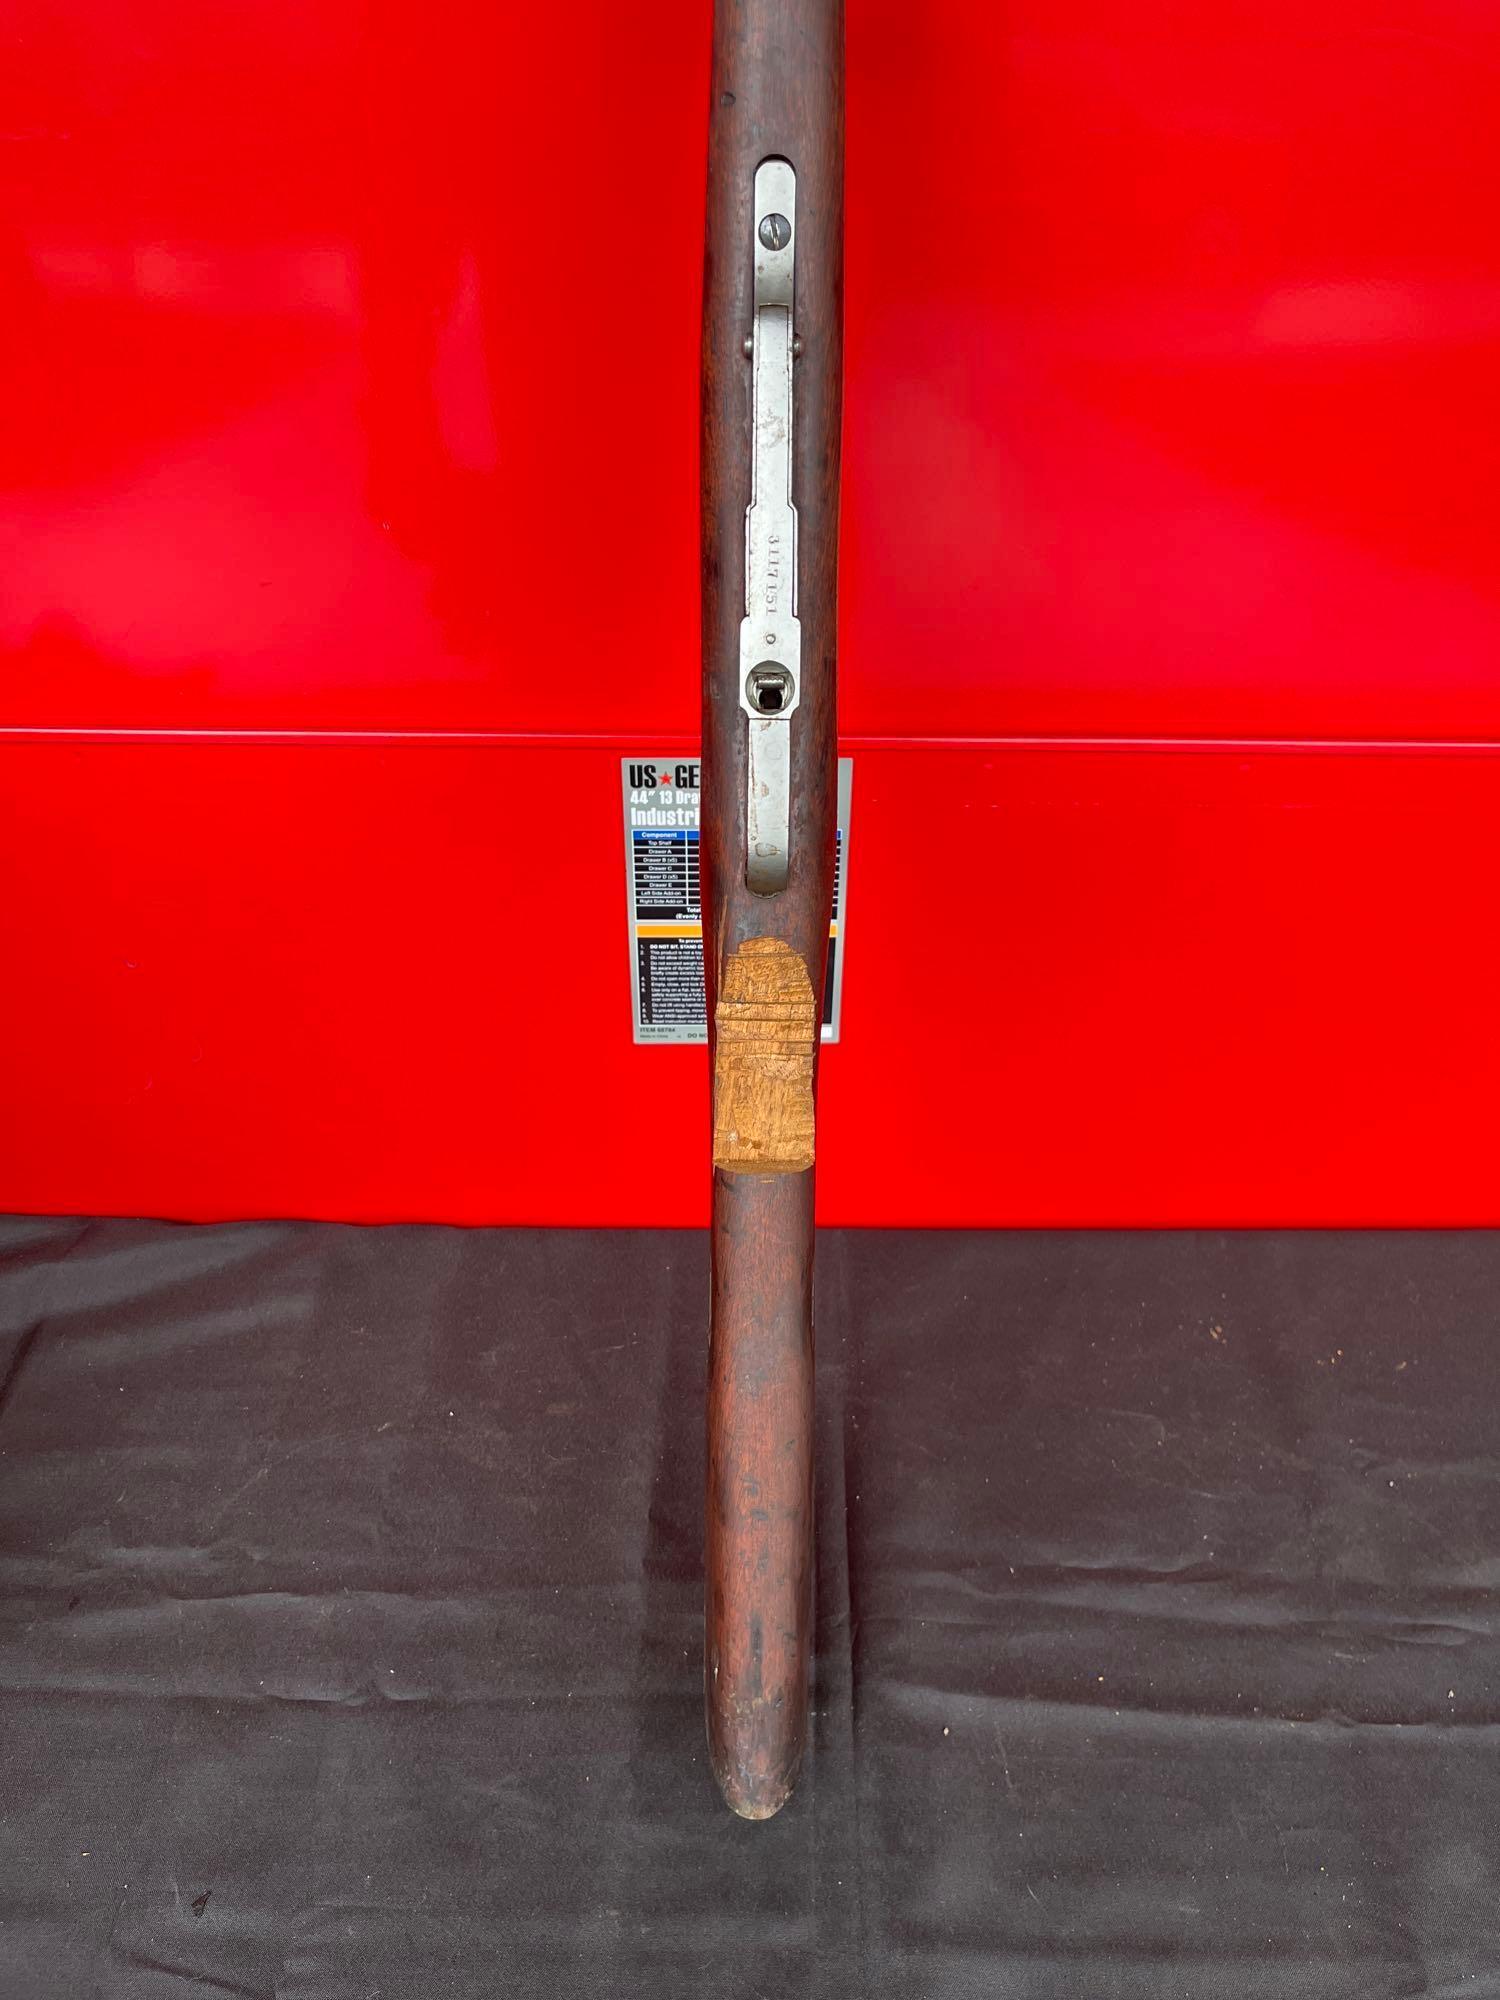 1955 26 Chinese Rifle - 3117151 - missing bolt